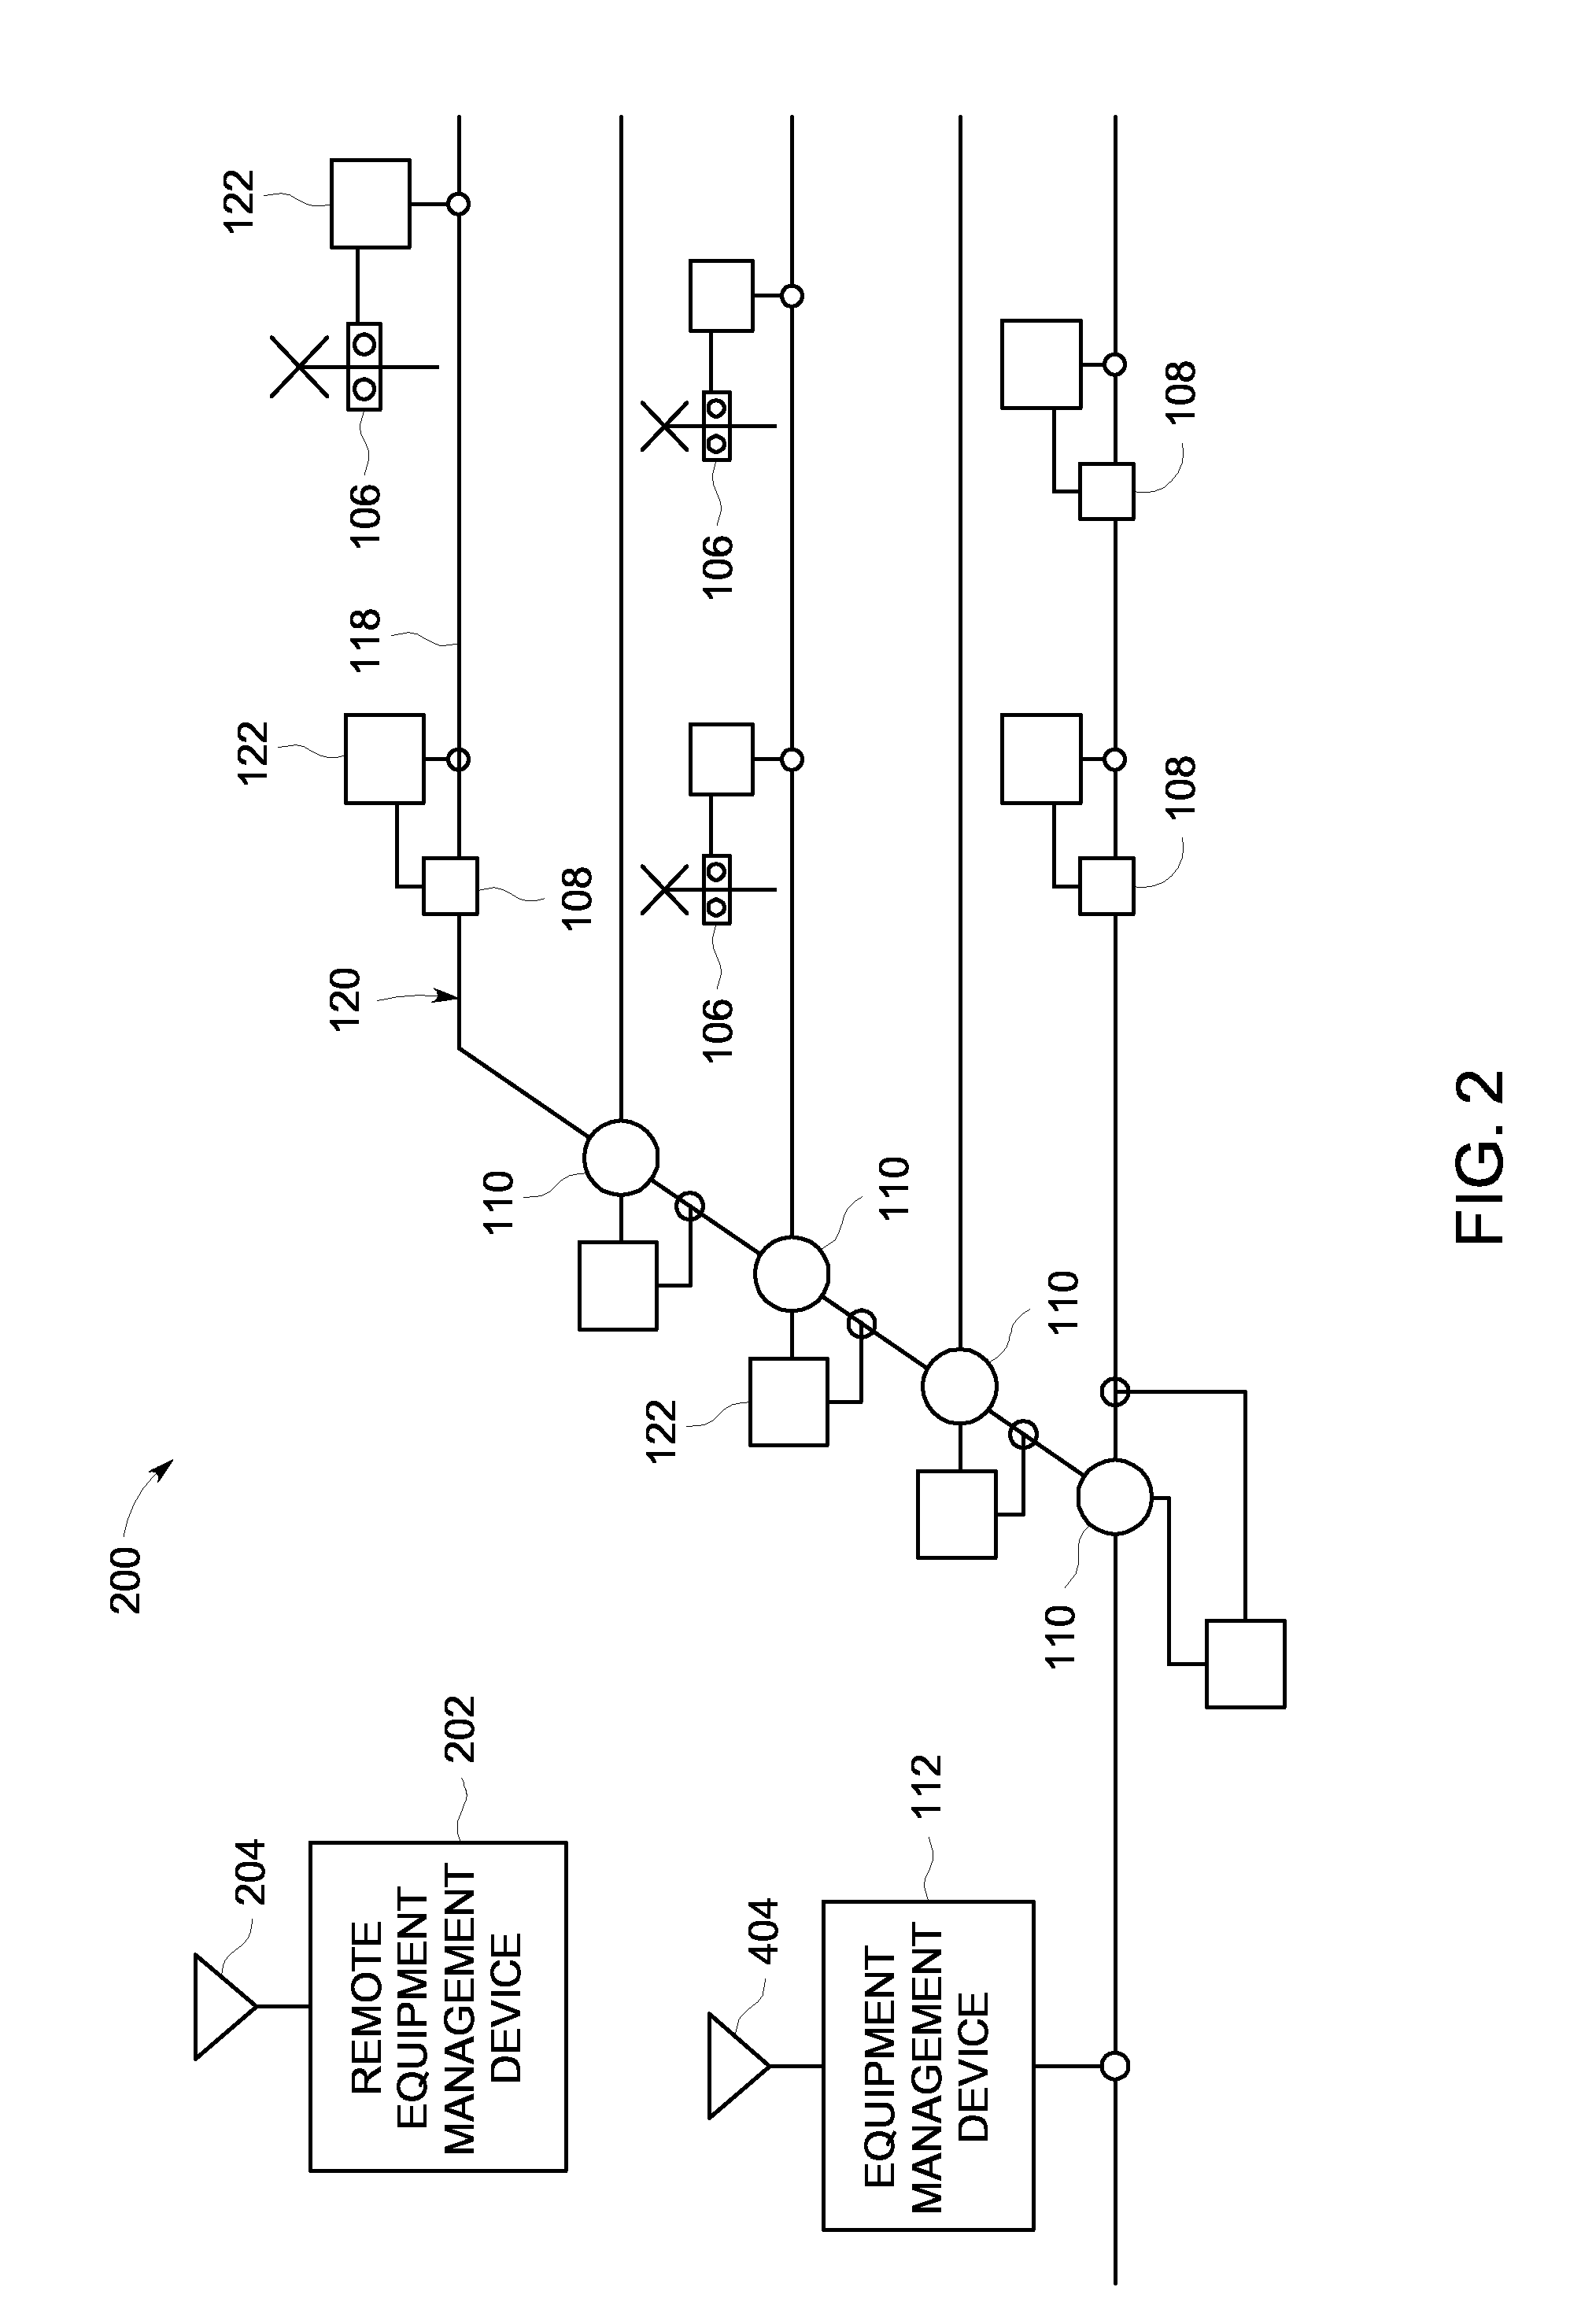 Rail appliance communication system and method for communicating with a rail appliance